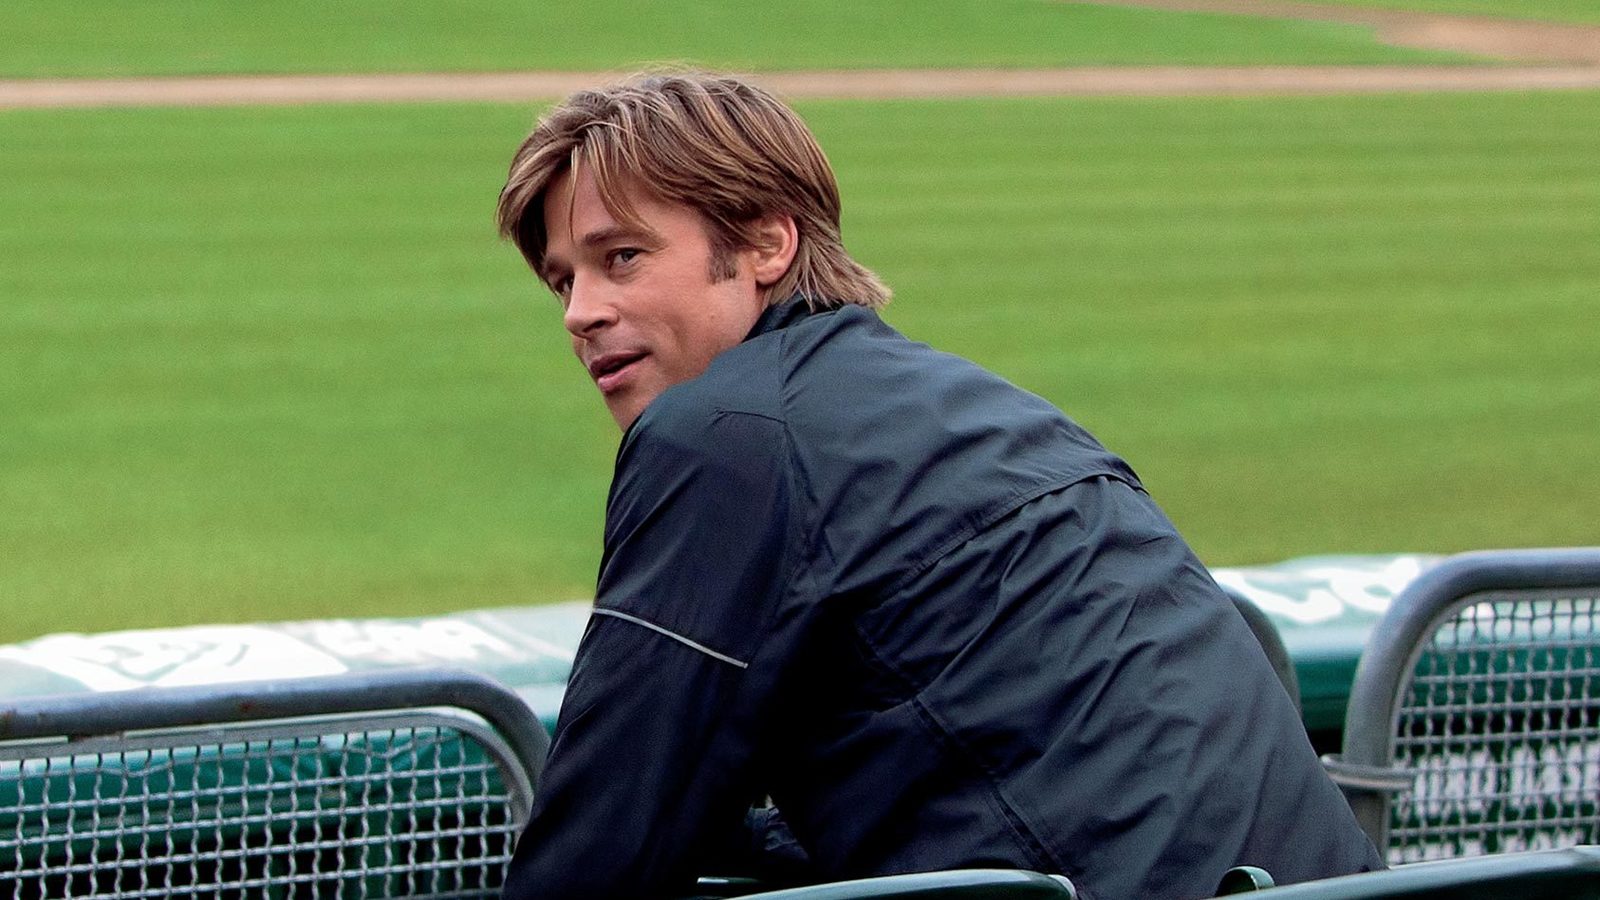 The Real Story Behind Moneyball: How Analytics Changed Baseball